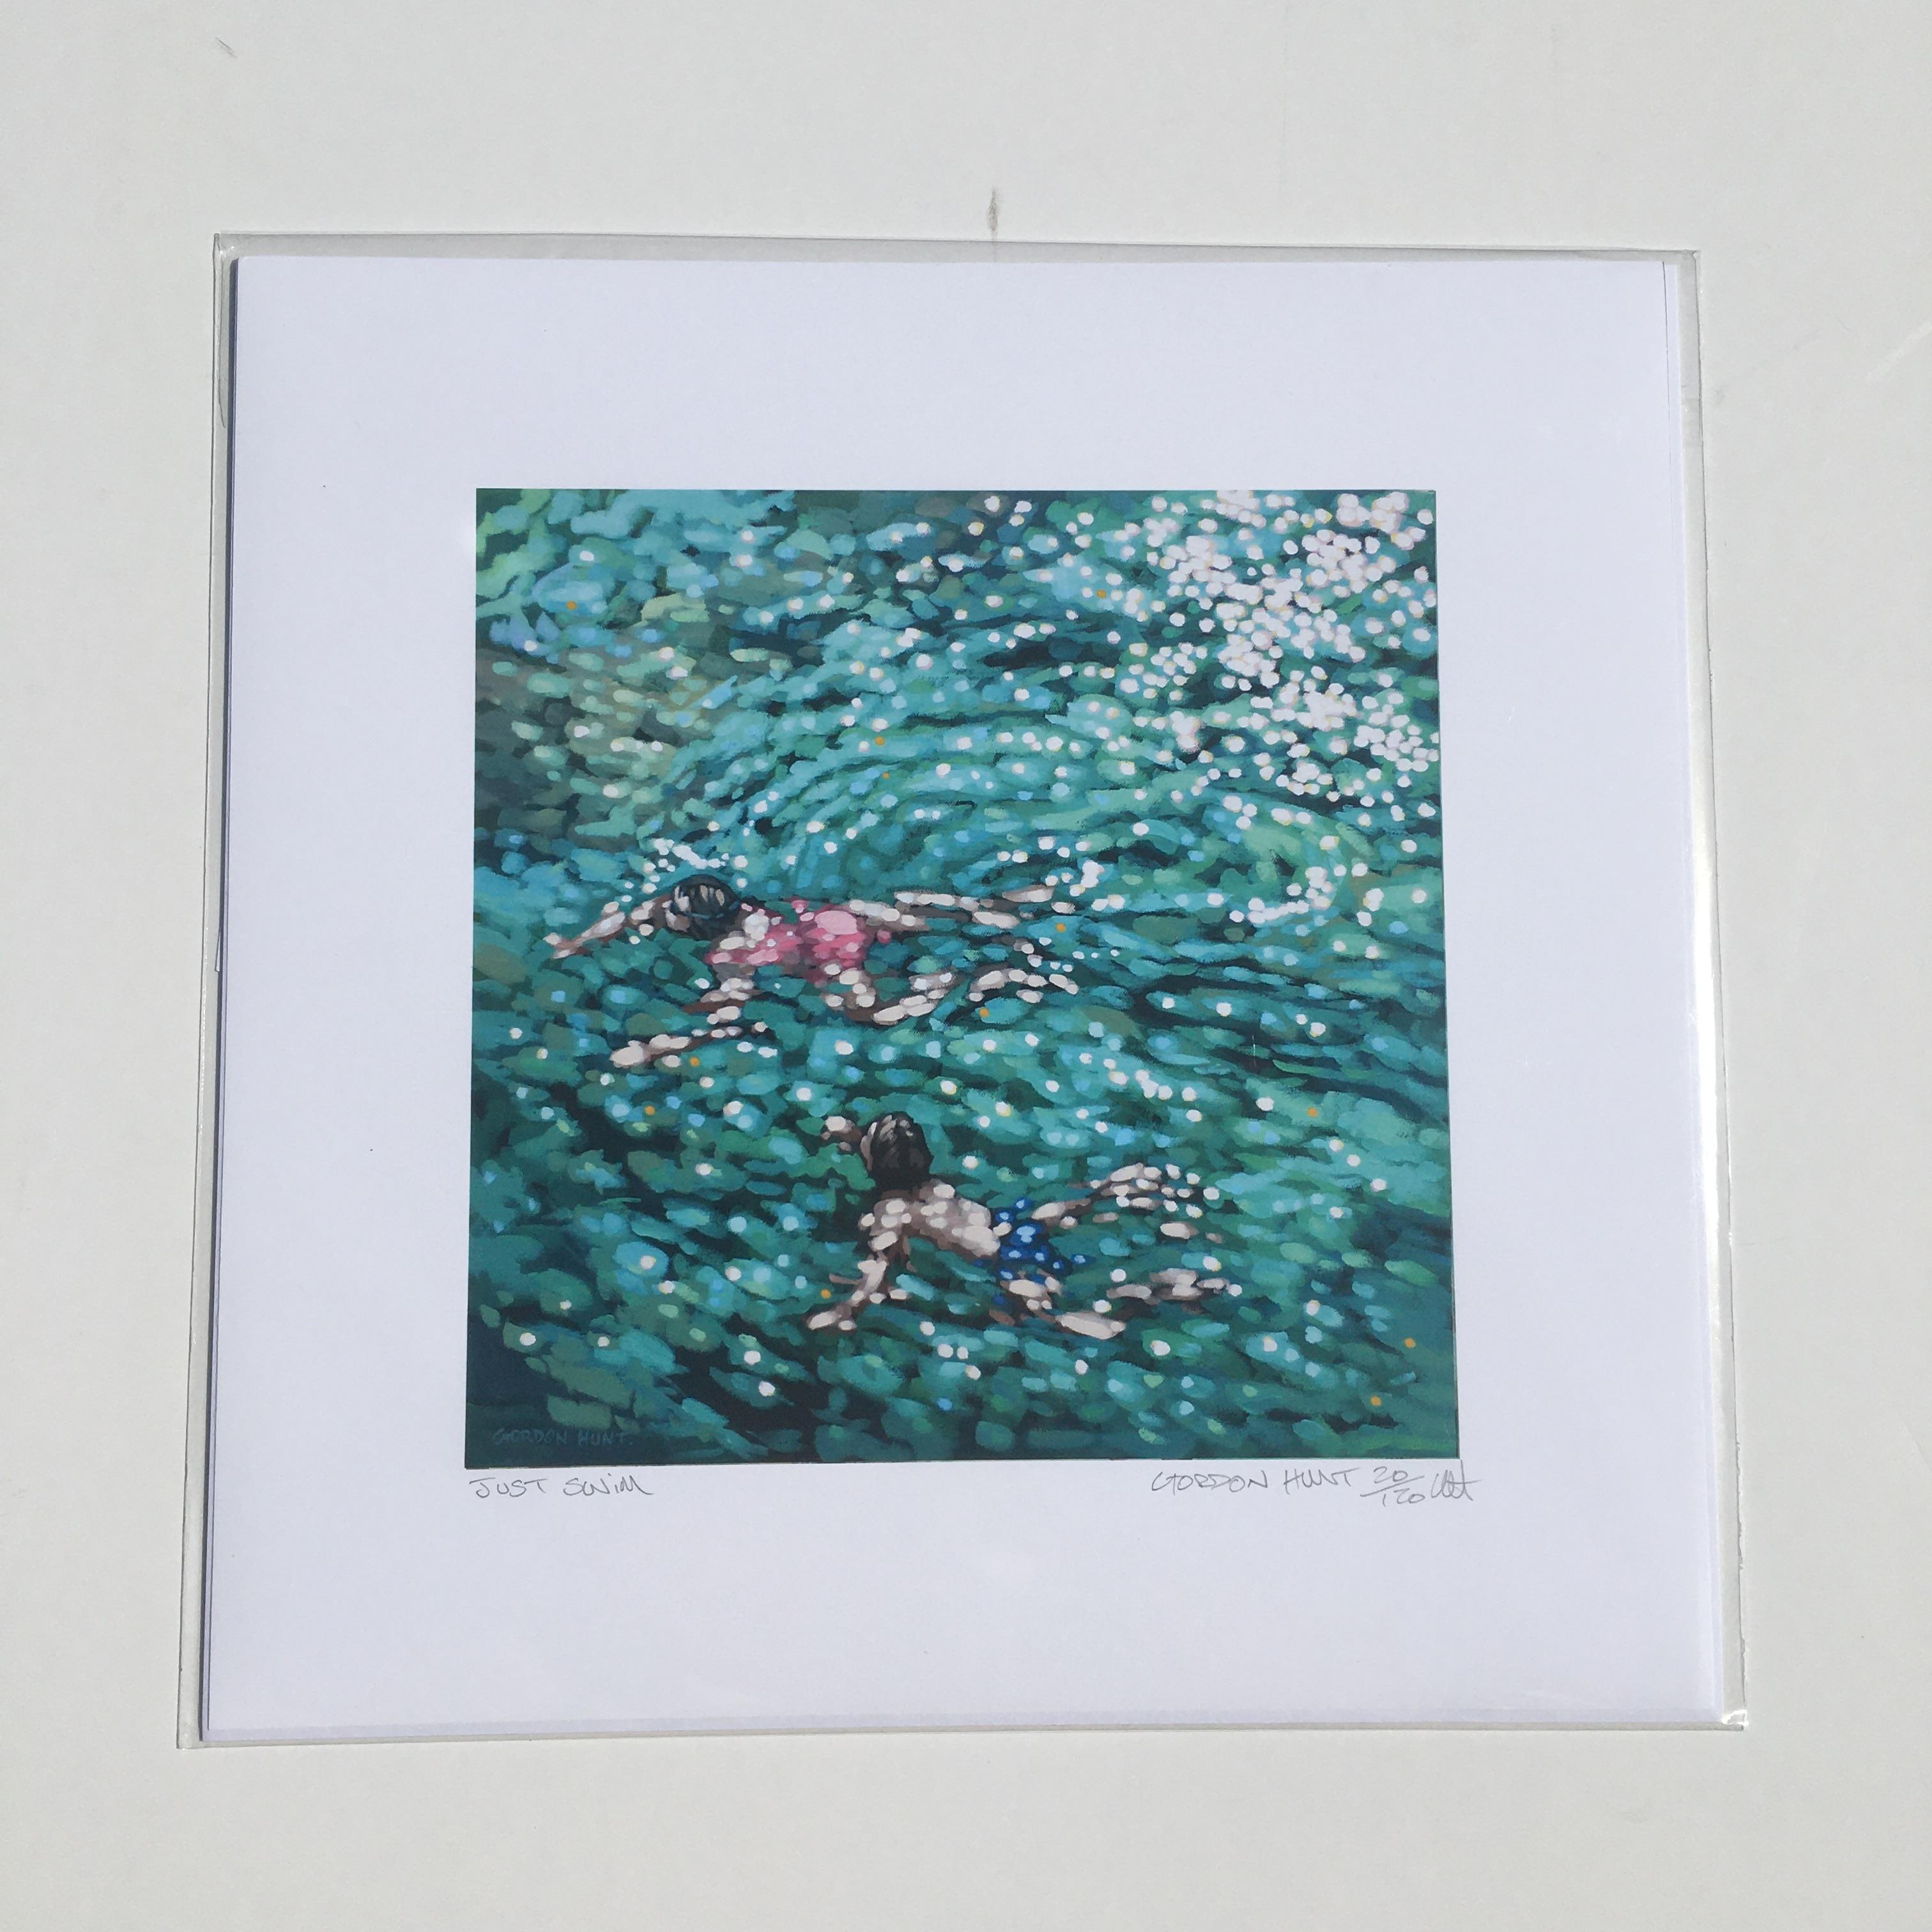 Gordon Hunt
Just swim
Limited Edition Giclee Print
Image Size: H 20cm x W 20cm
Mounted Size: H 25cm x W 25cm x D 0.5cm
Sold Unframed
Signed and Numbered
Please note that insitu images are purely an indication of how a piece may look.

Just Swim is a